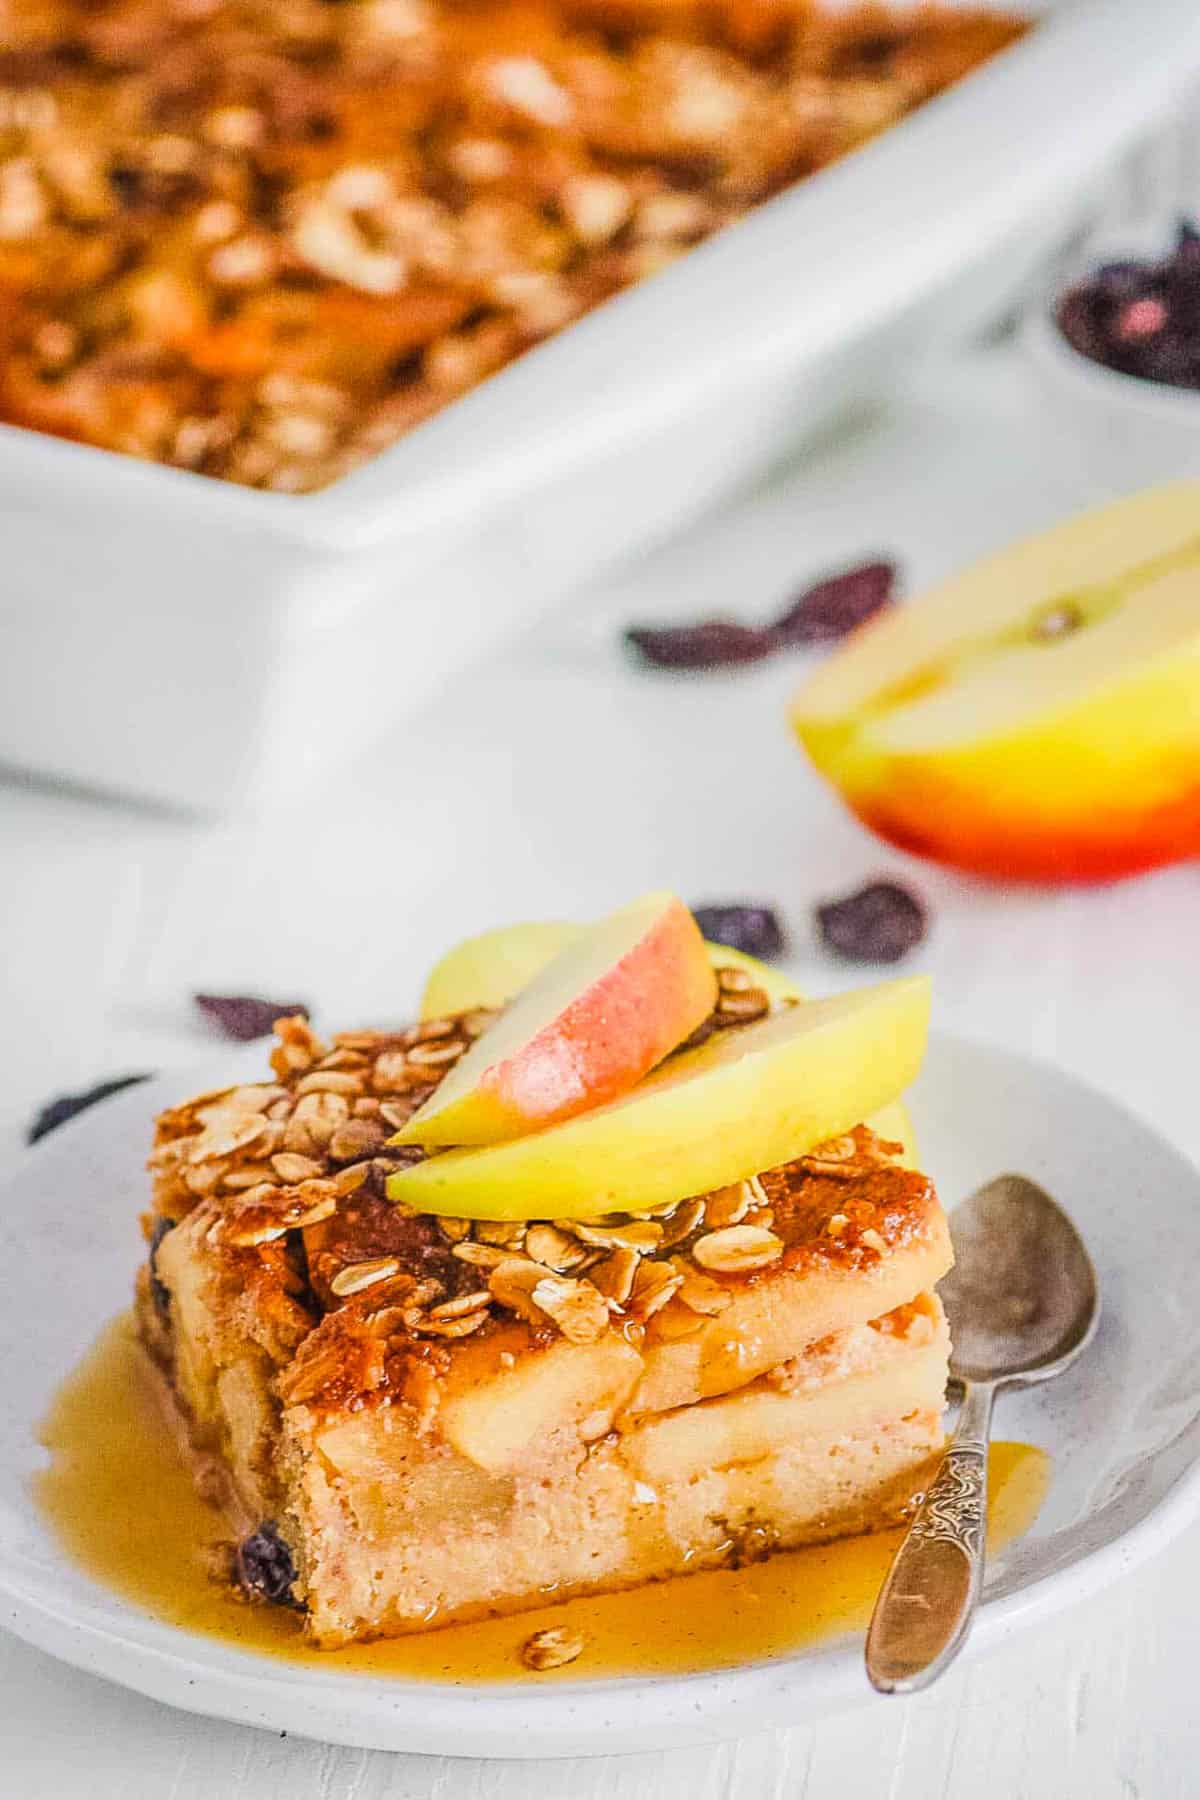 Gluten free apple cake on a plate with maple syrup, garnished with apple slices.